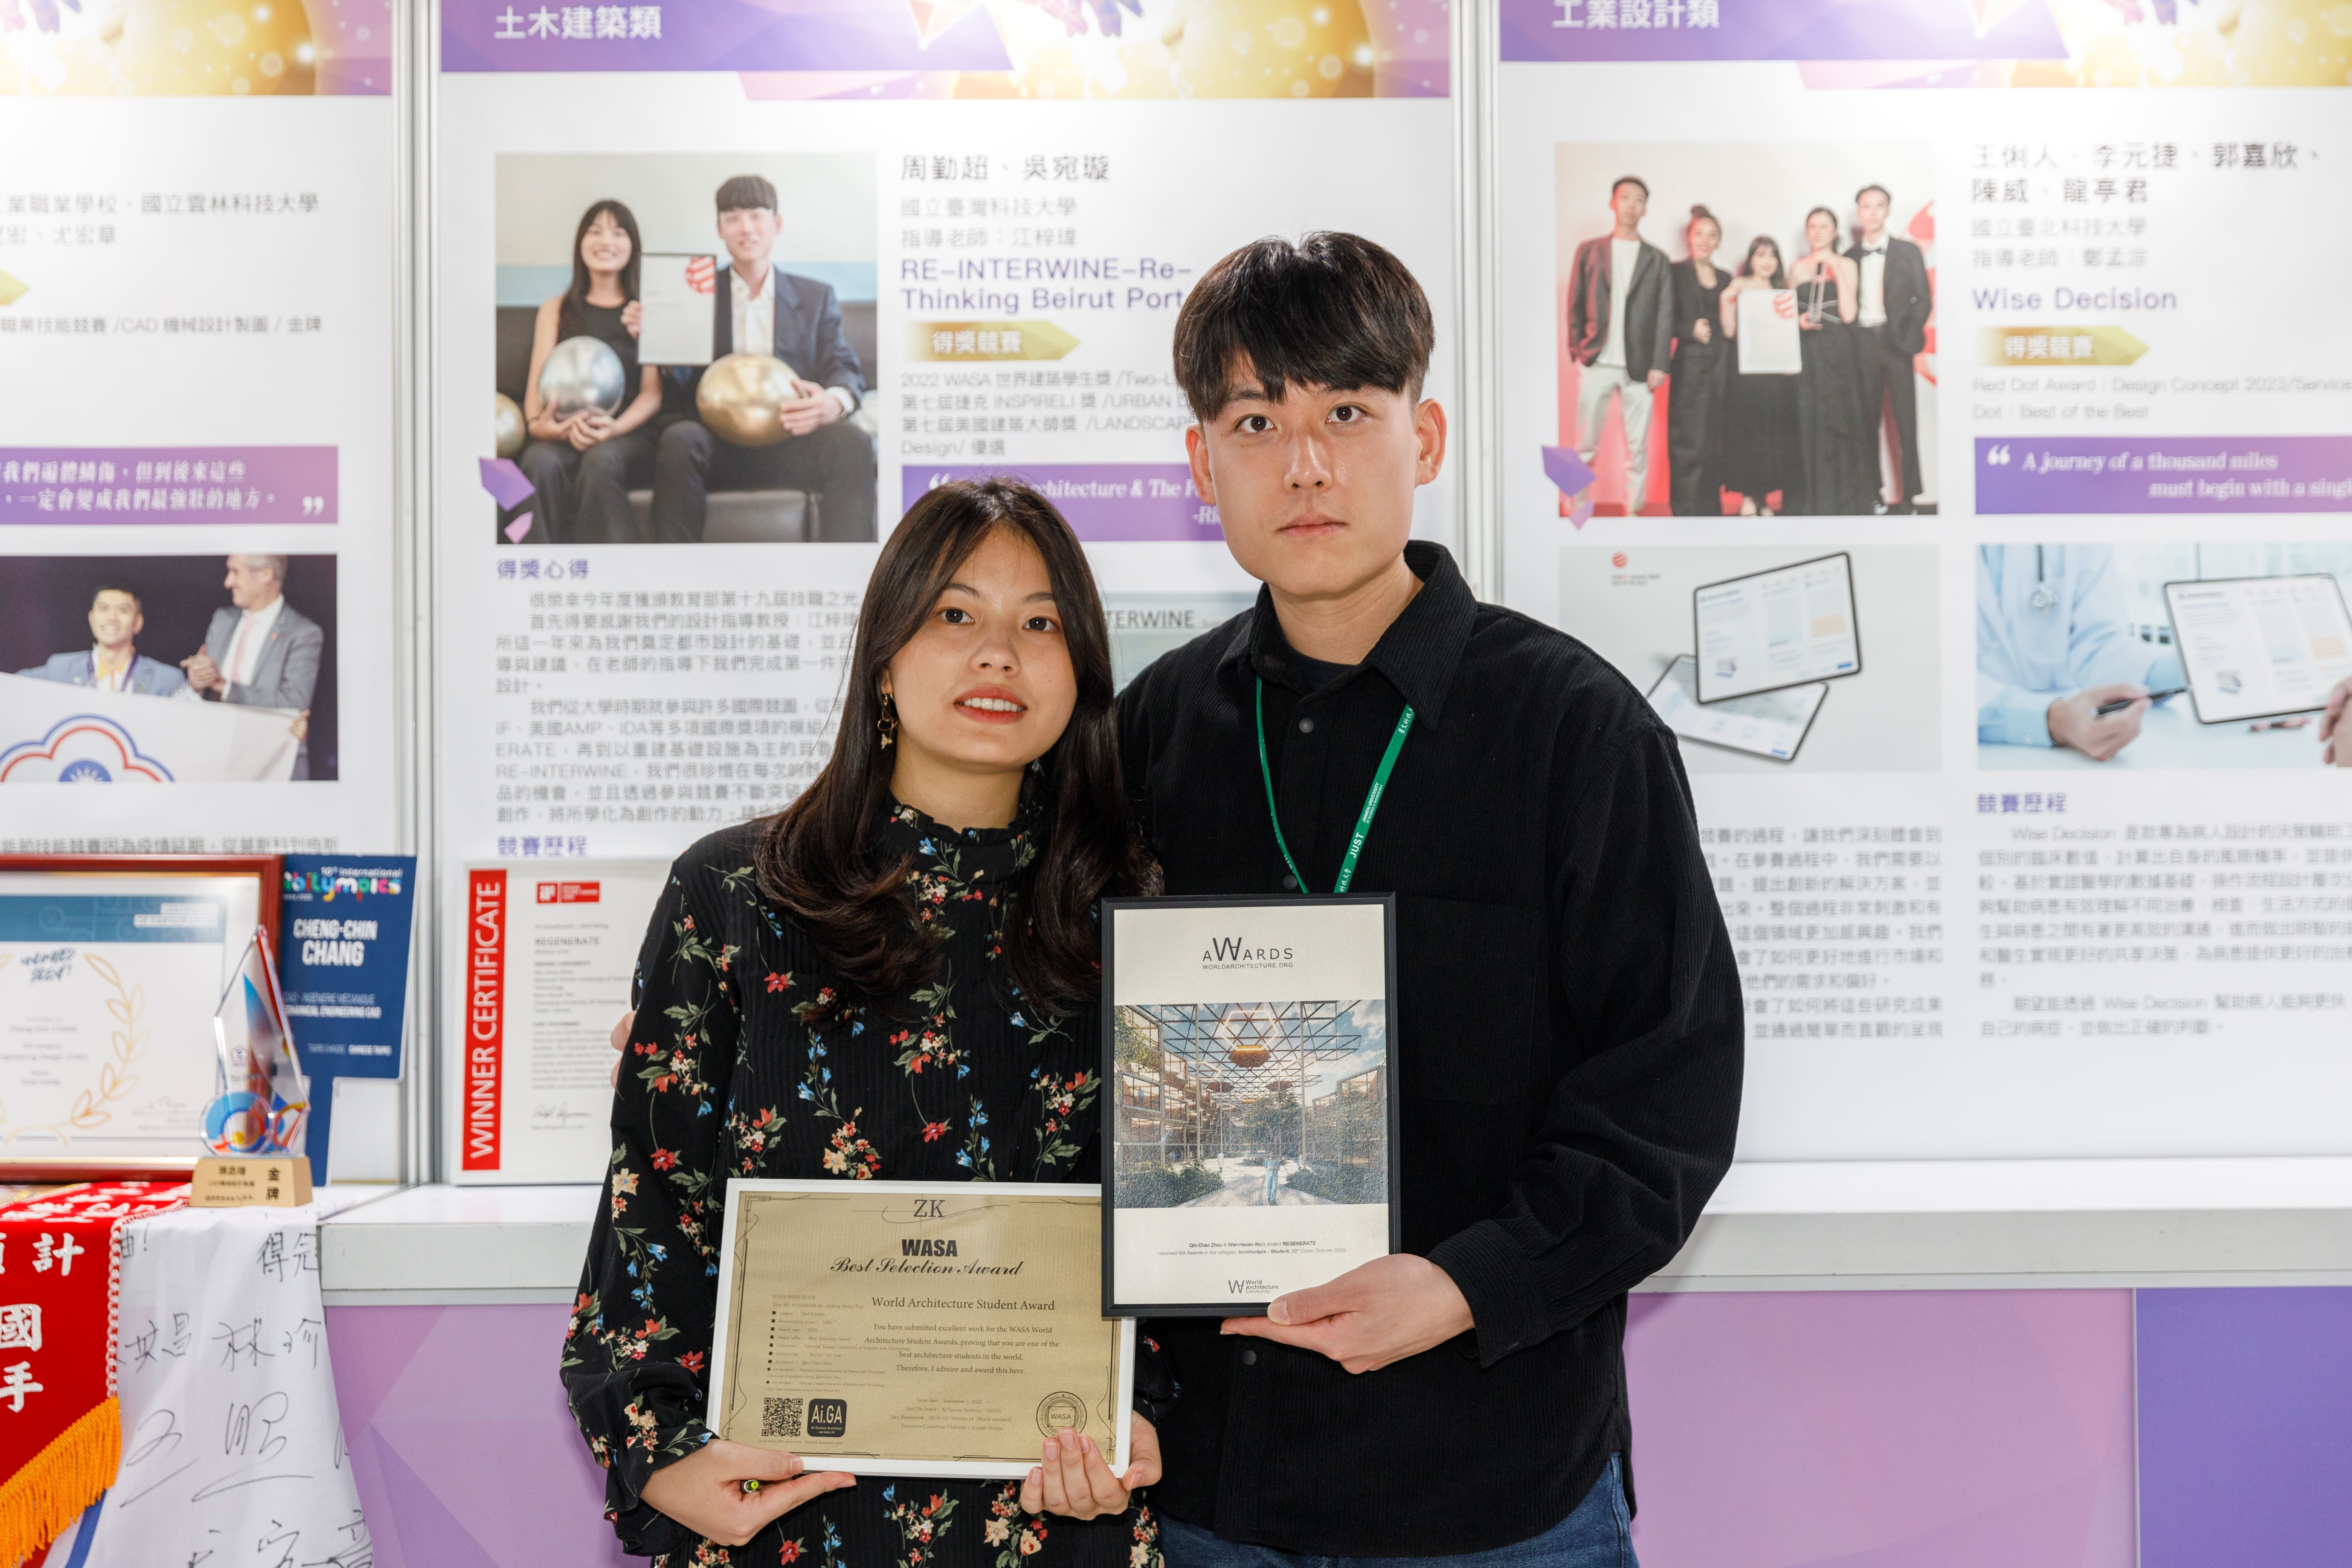 Wan-Xuan Wu (left) and Qin-Chao Zhou (right) received numerous international awards during their academic journey, earning recognition for their outstanding abilities.